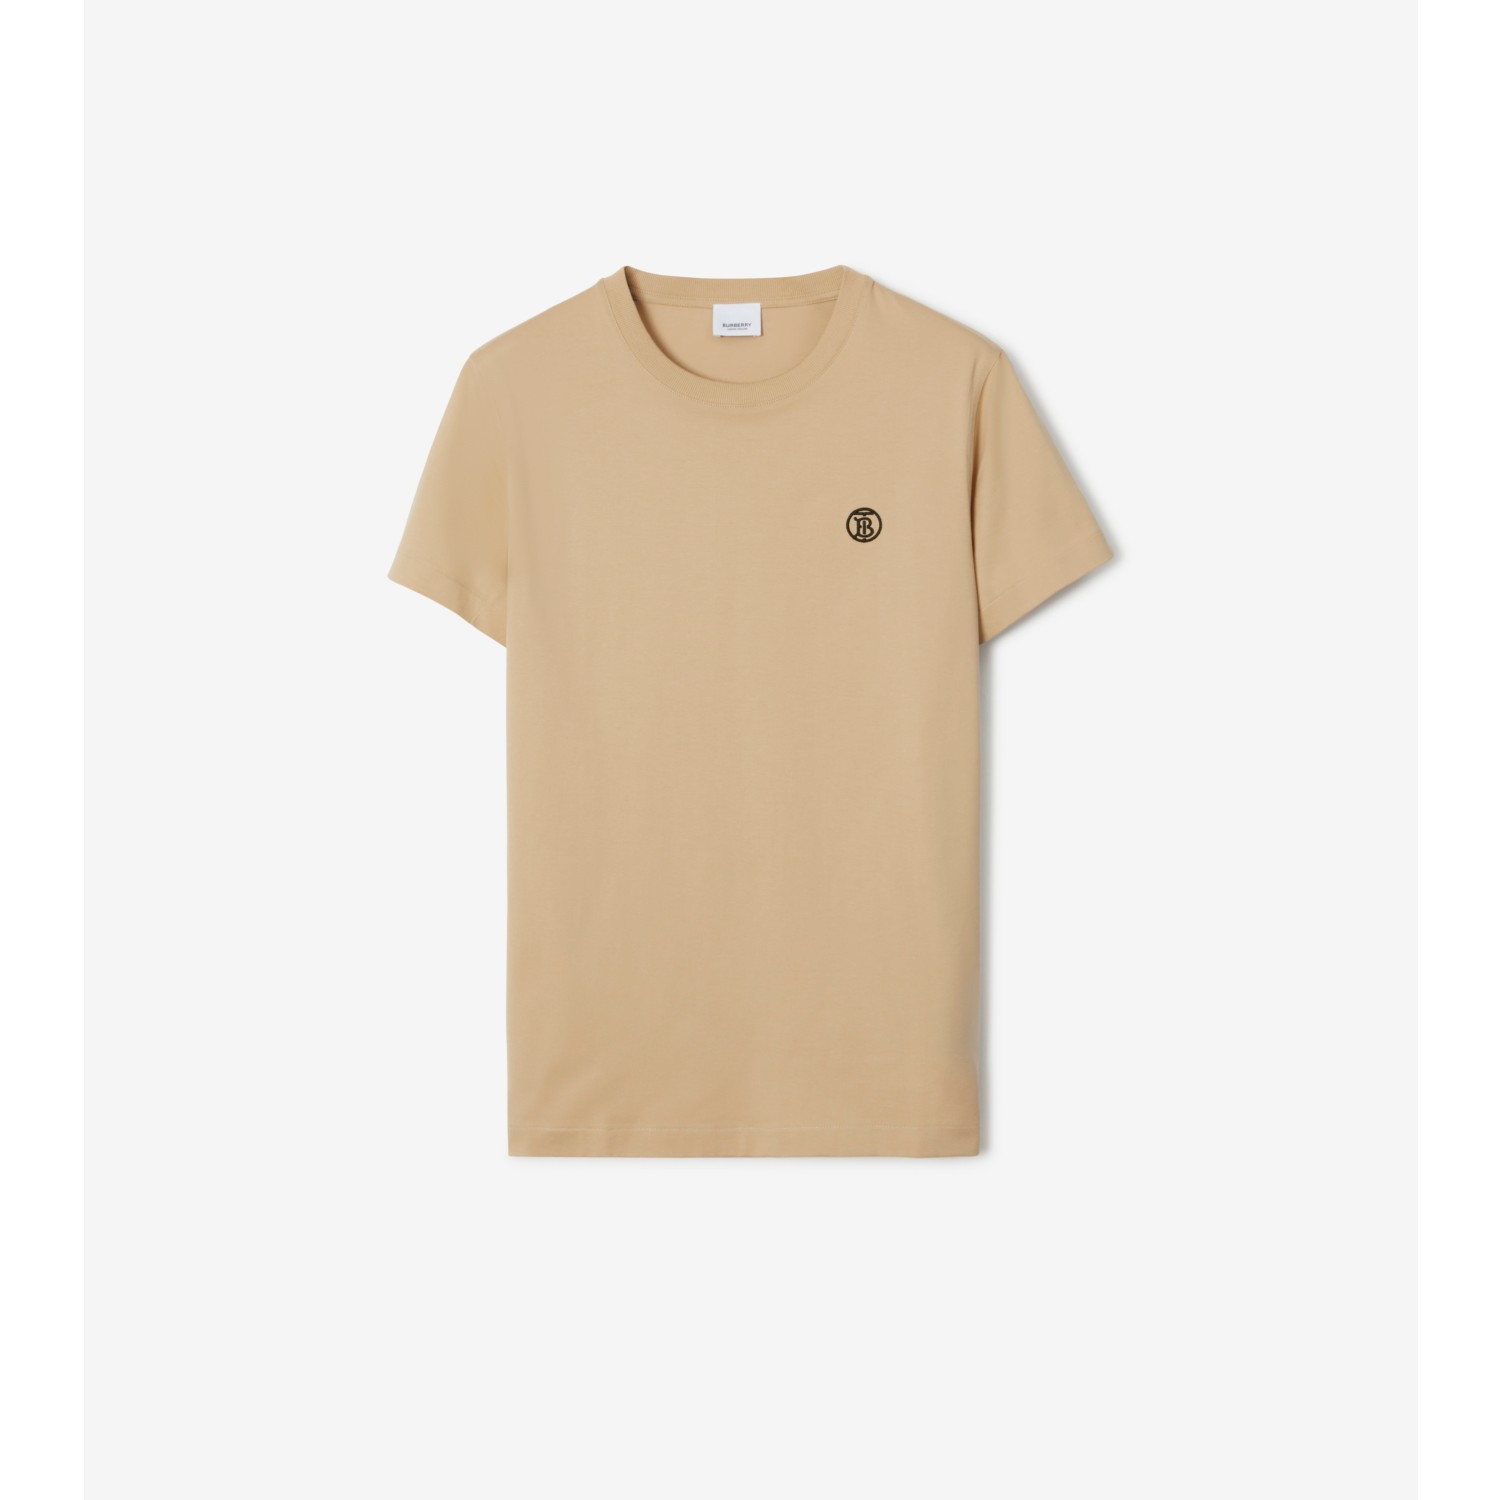 Burberry Men's Logo-Embroidered Cotton-Jersey T-Shirt